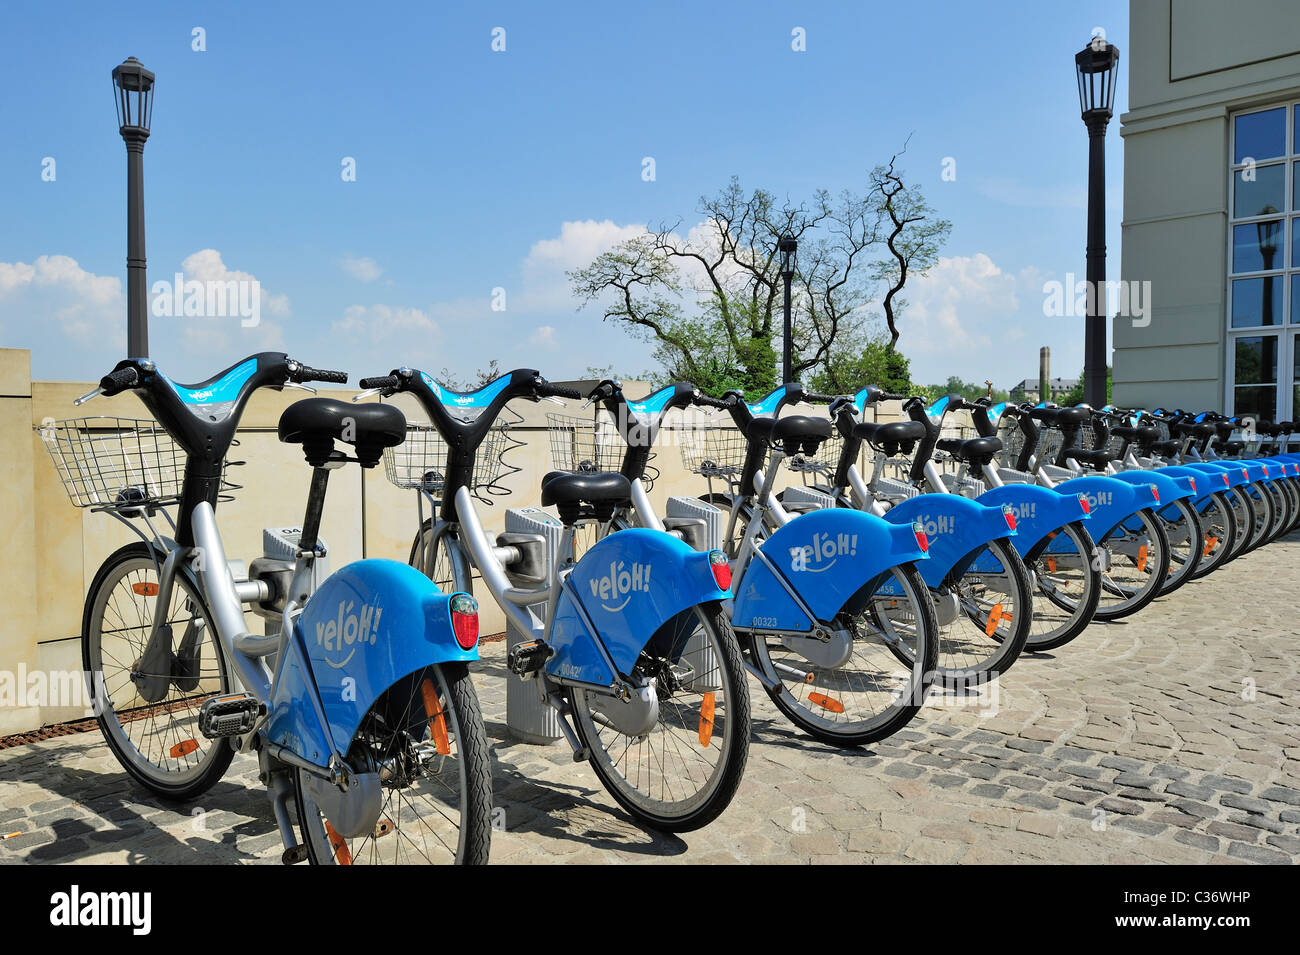 Rental bikes Véloh at Luxembourg, Grand Duchy of Luxembourg Stock Photo